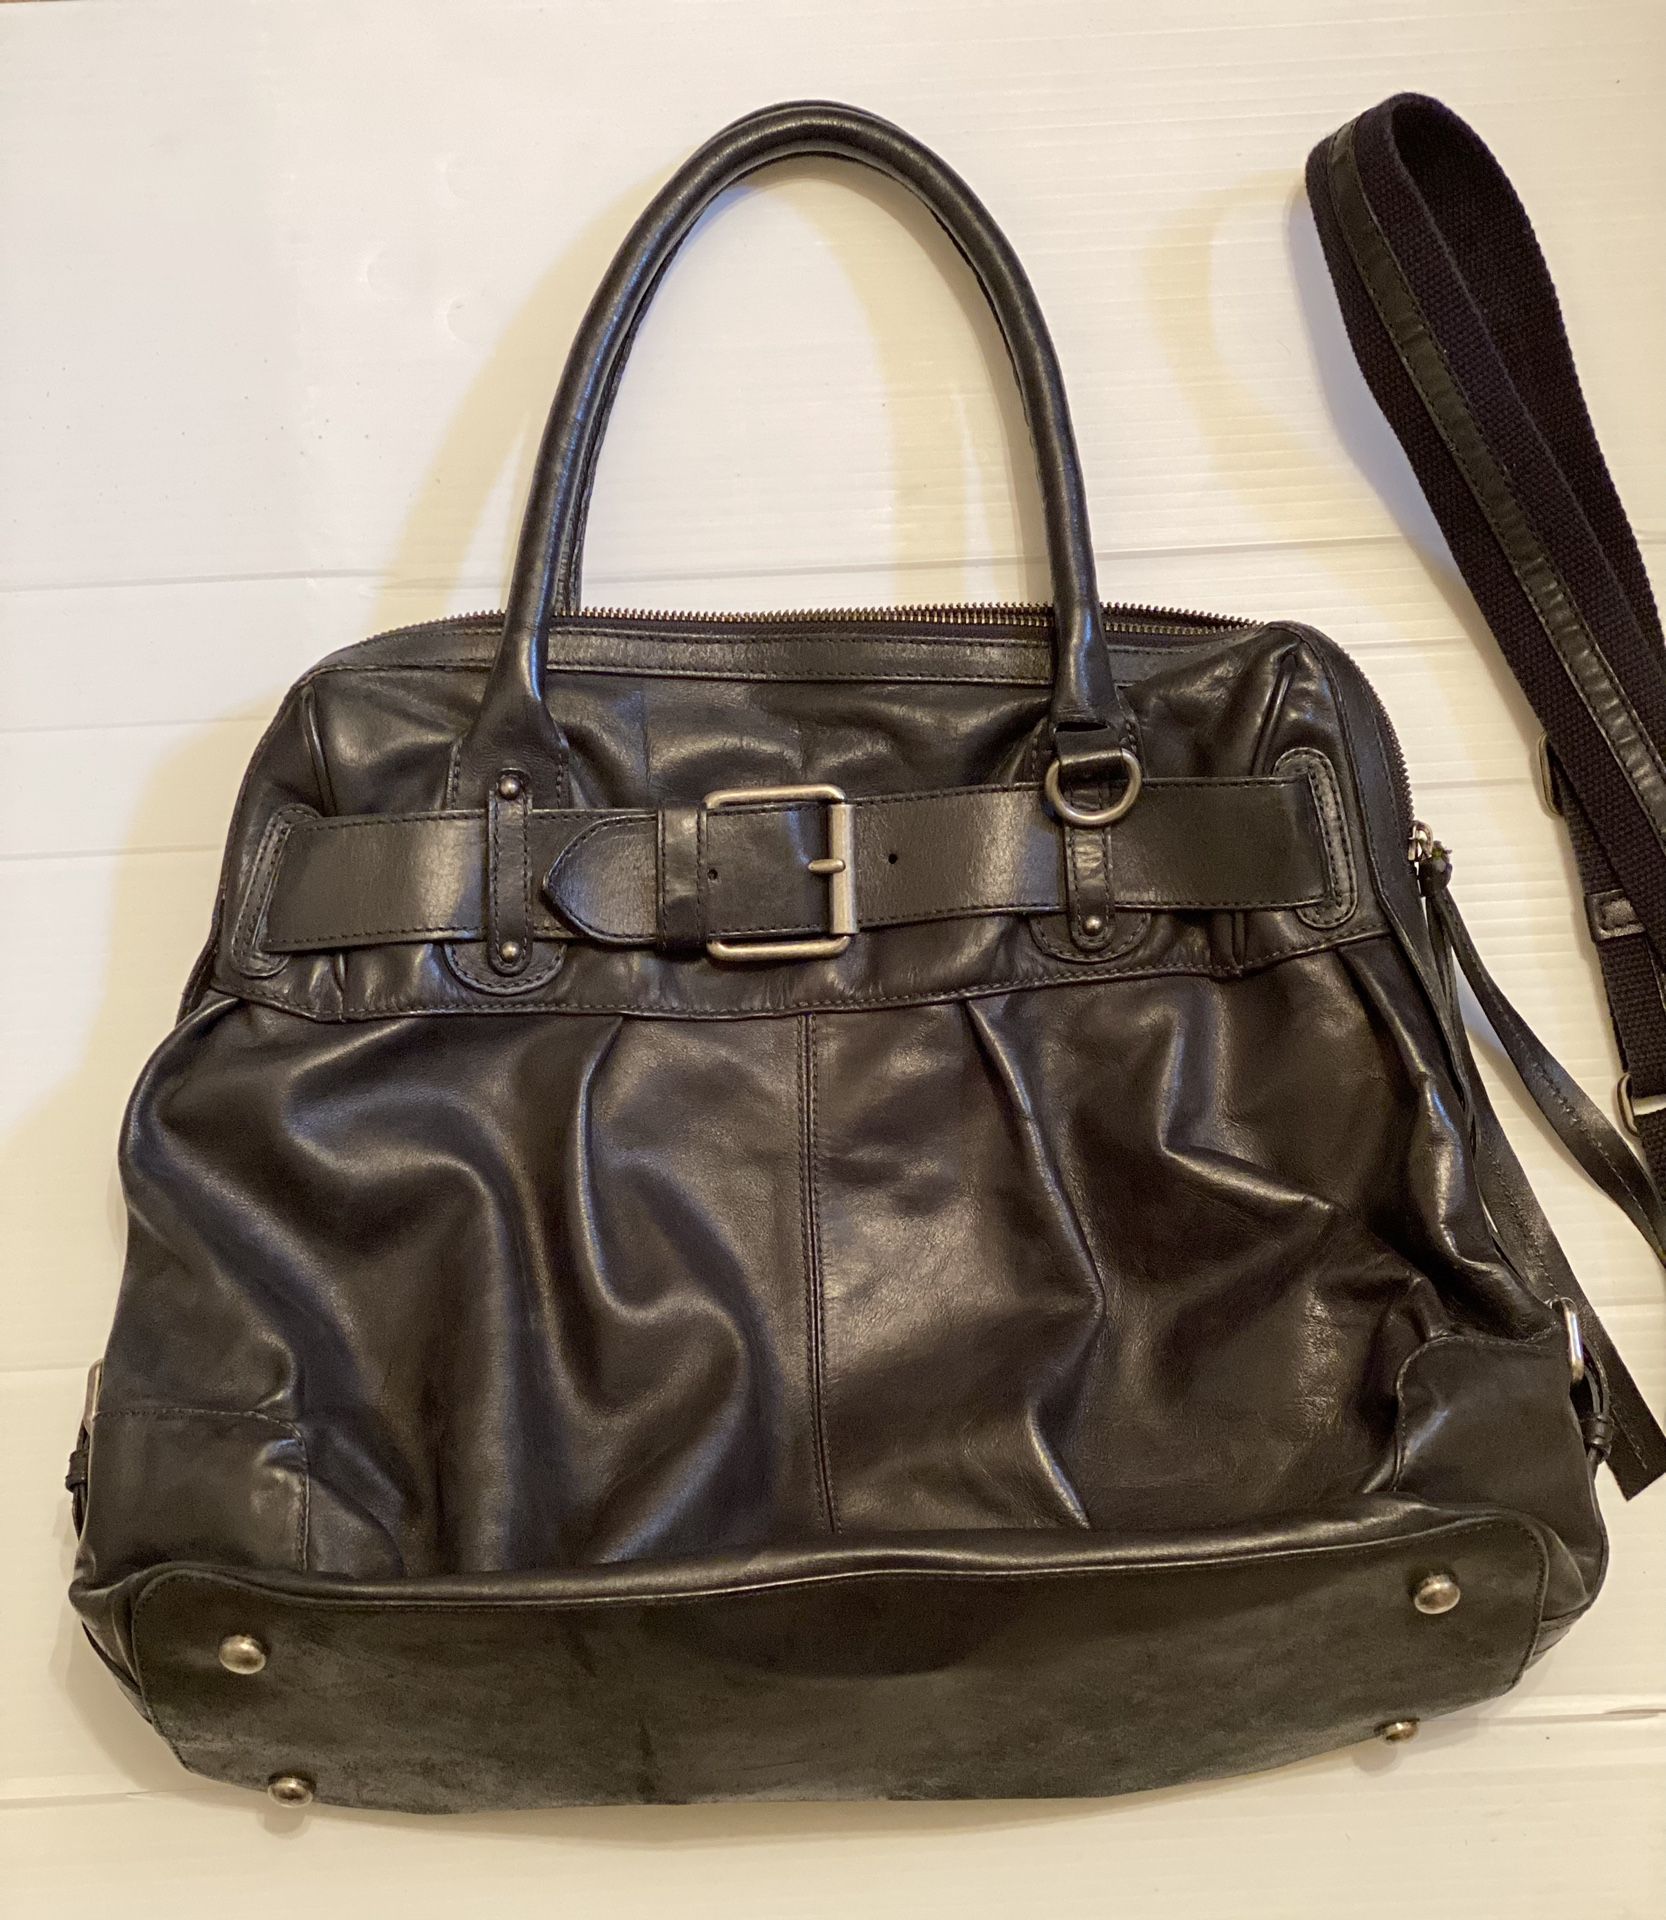 Dulce Leather Bag